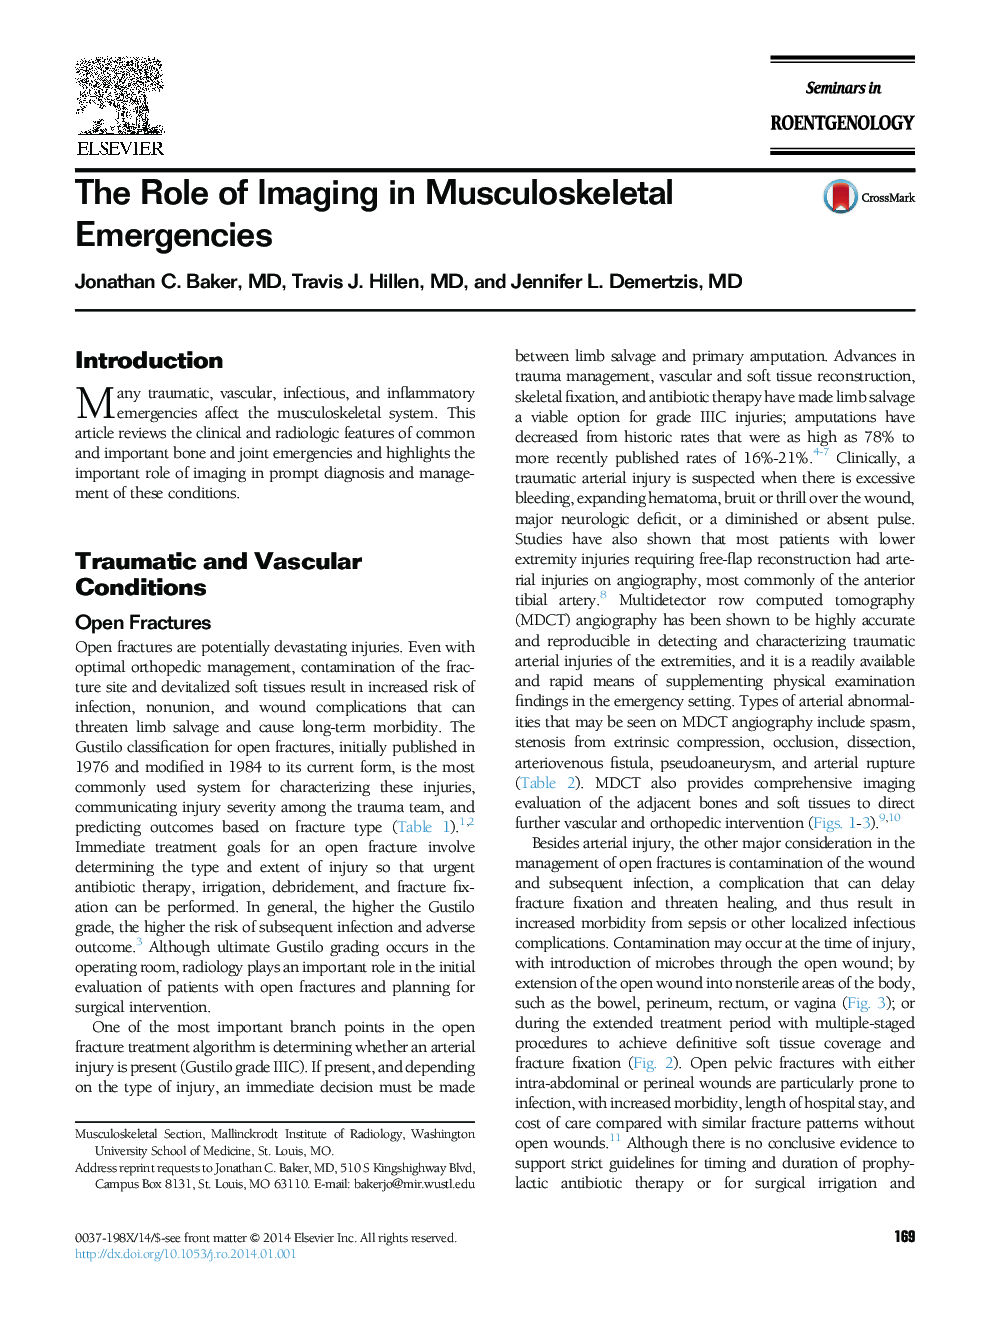 The Role of Imaging in Musculoskeletal Emergencies